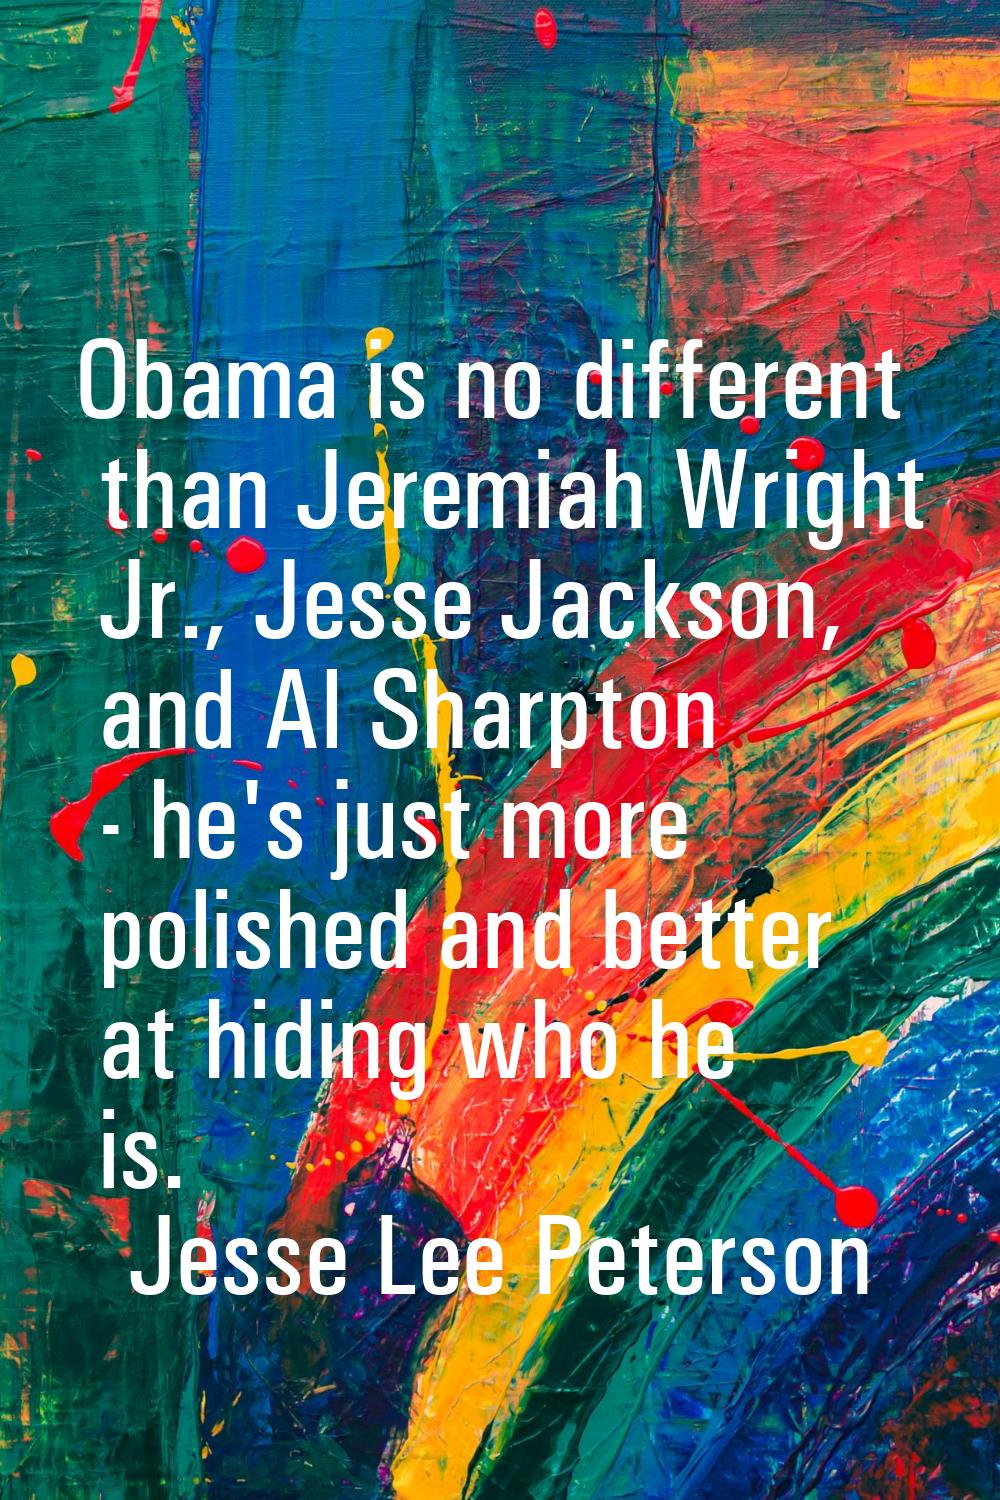 Obama is no different than Jeremiah Wright Jr., Jesse Jackson, and Al Sharpton - he's just more pol